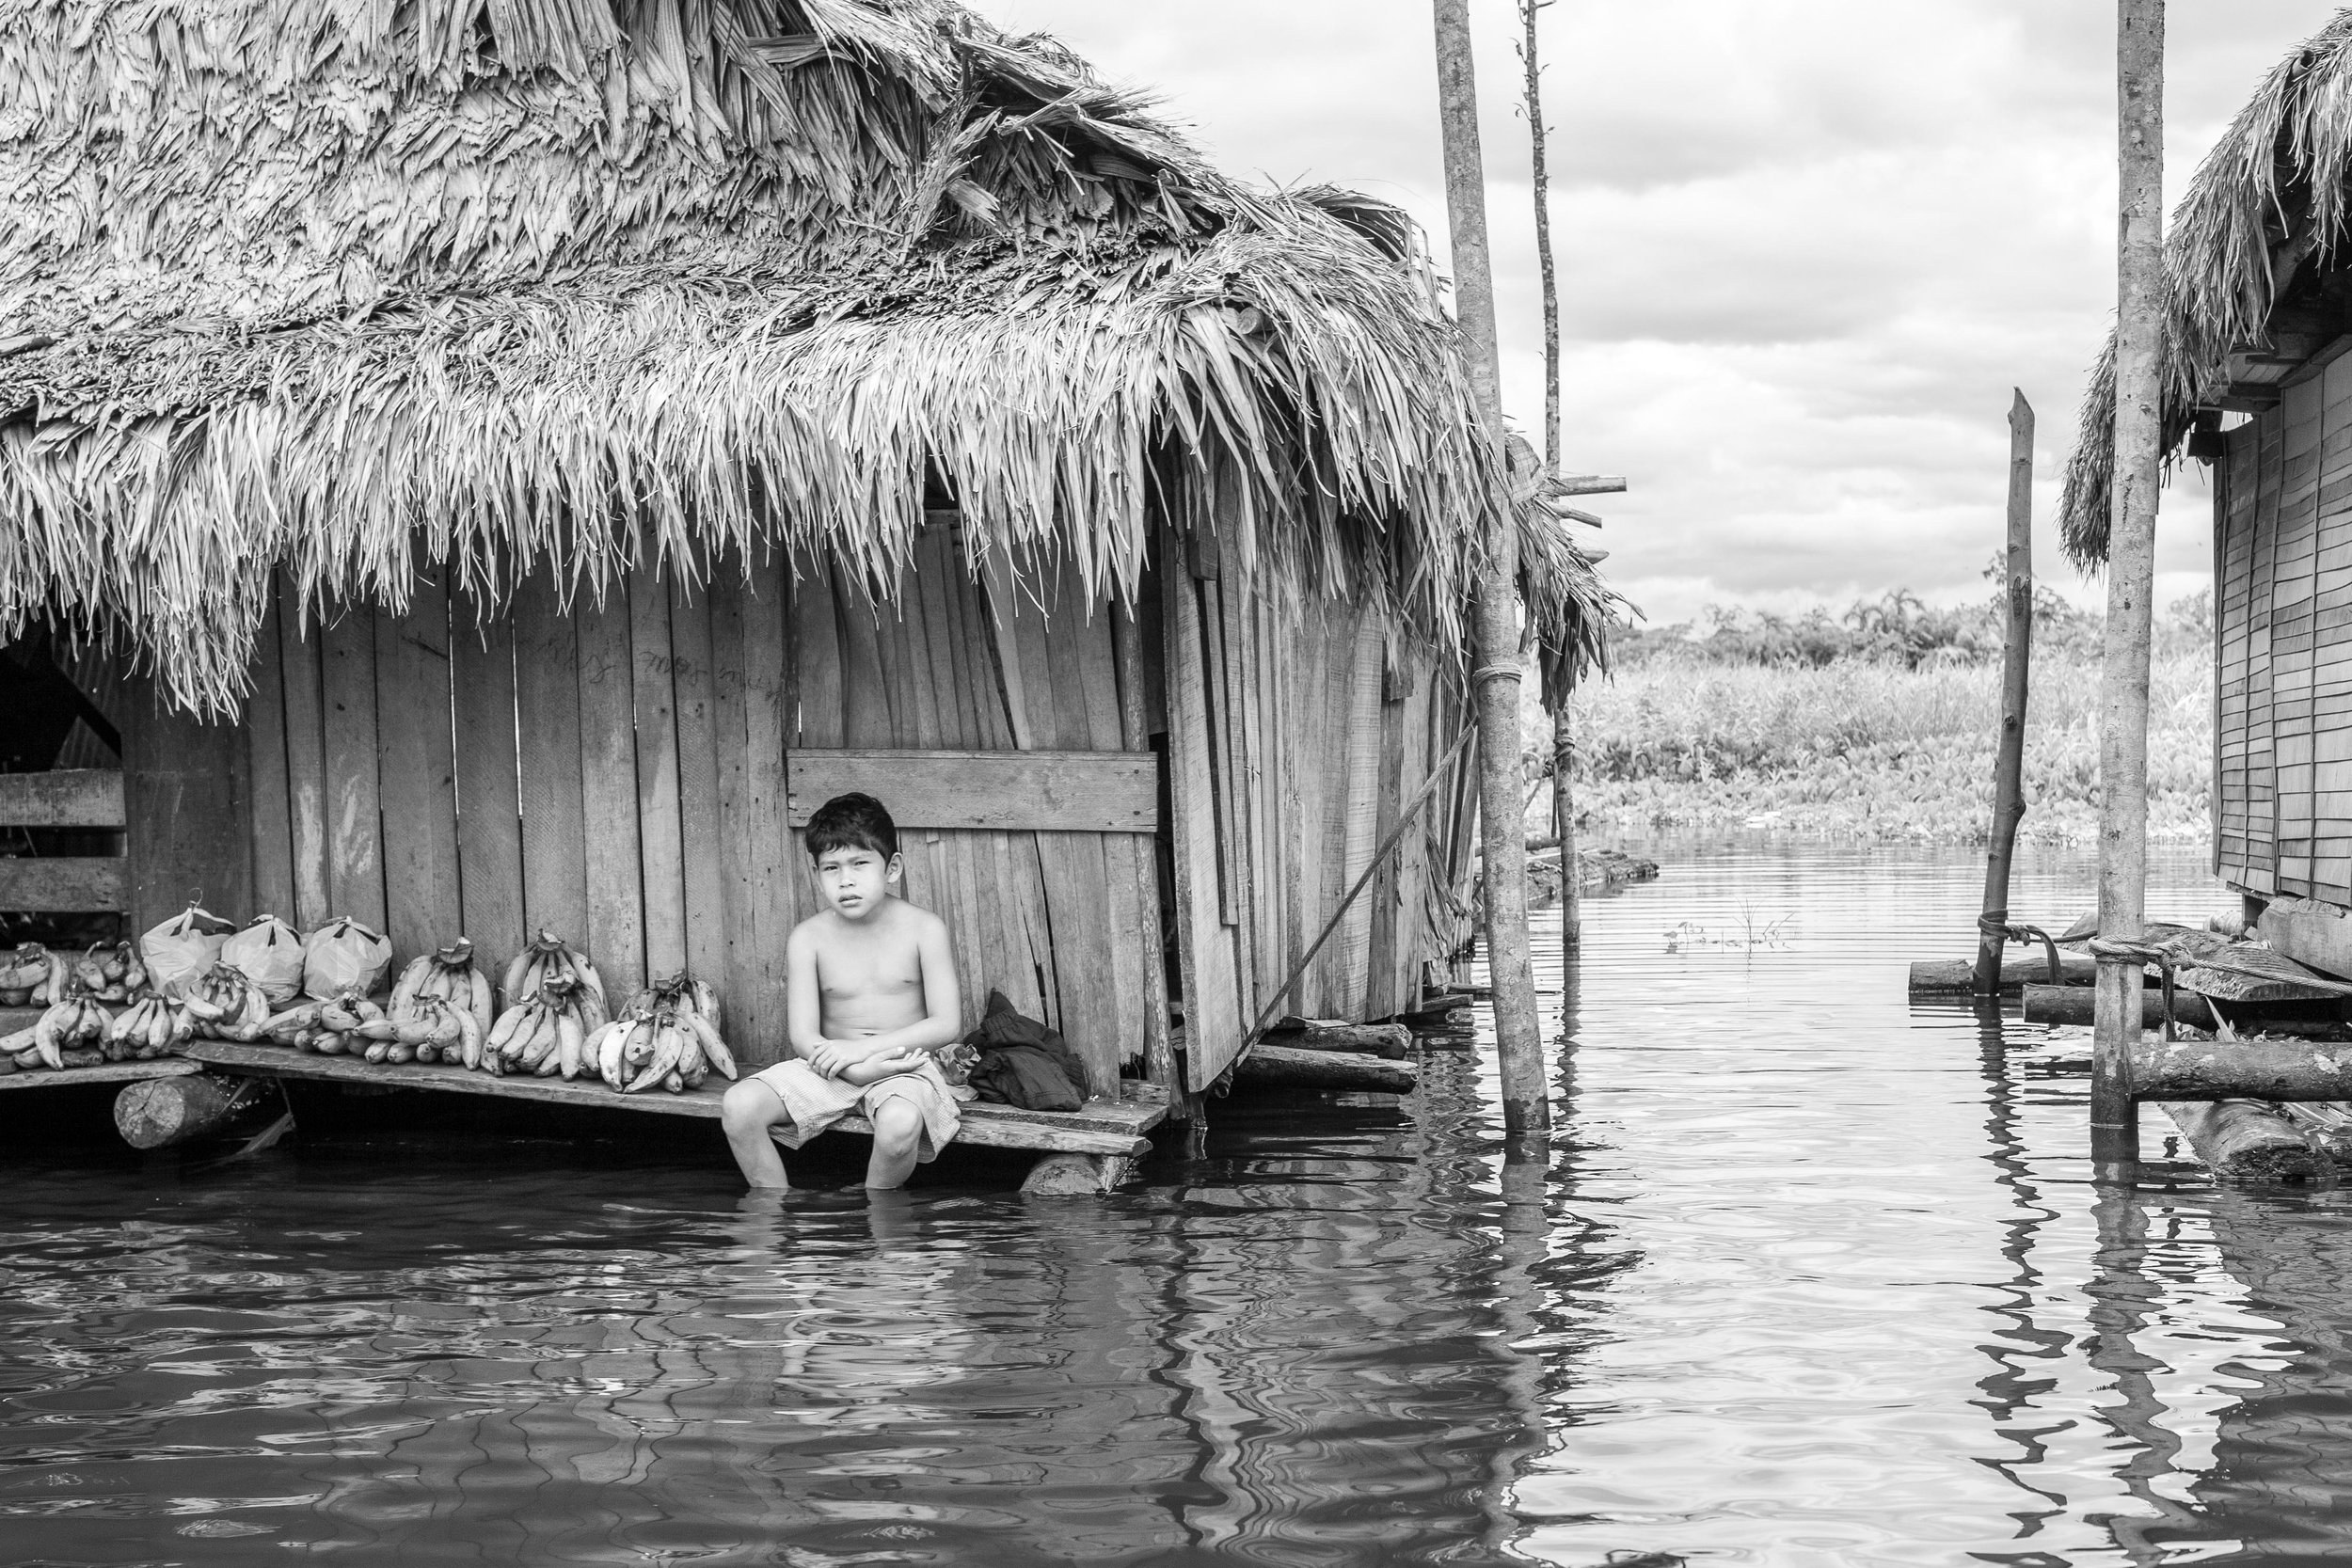 A young boy sells bananas in the flooded village of Belen in Iquitos, Peru.